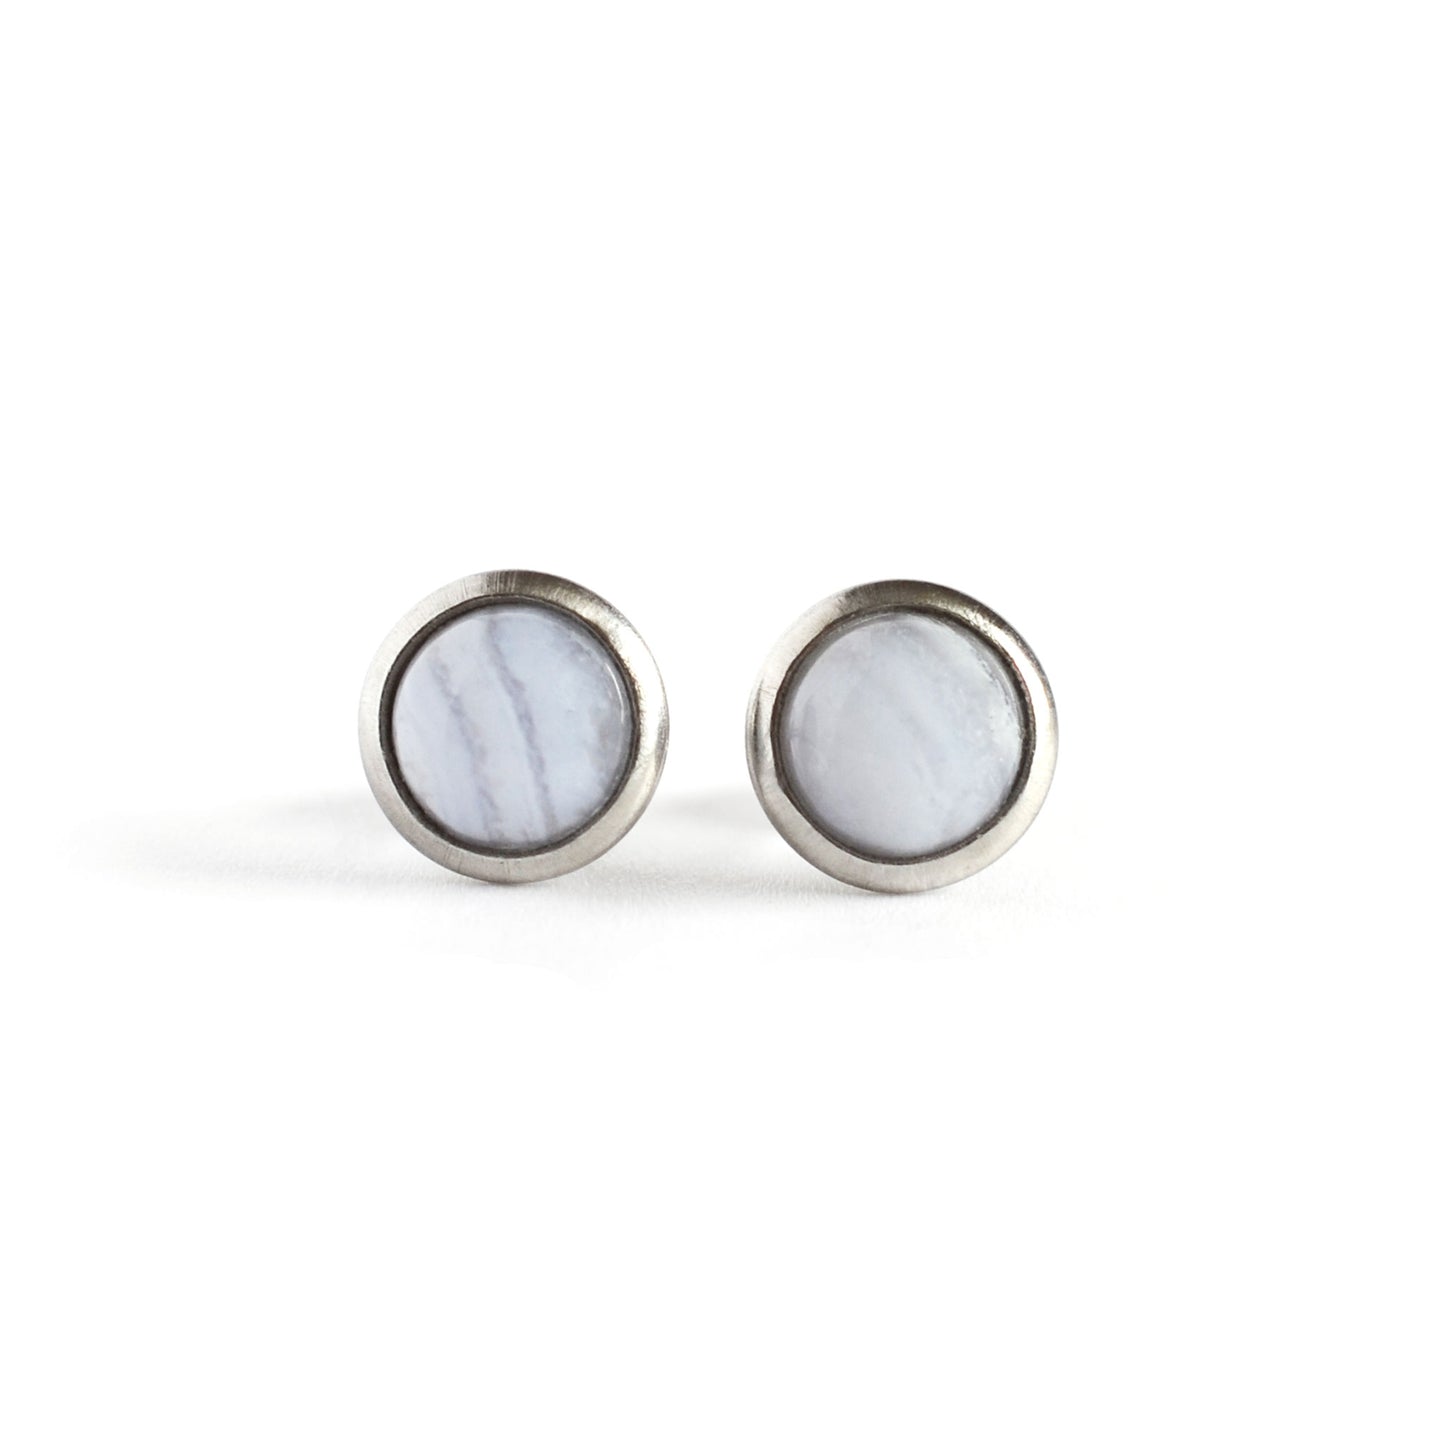 Front view of round Blue Lace Agate earrings on white background